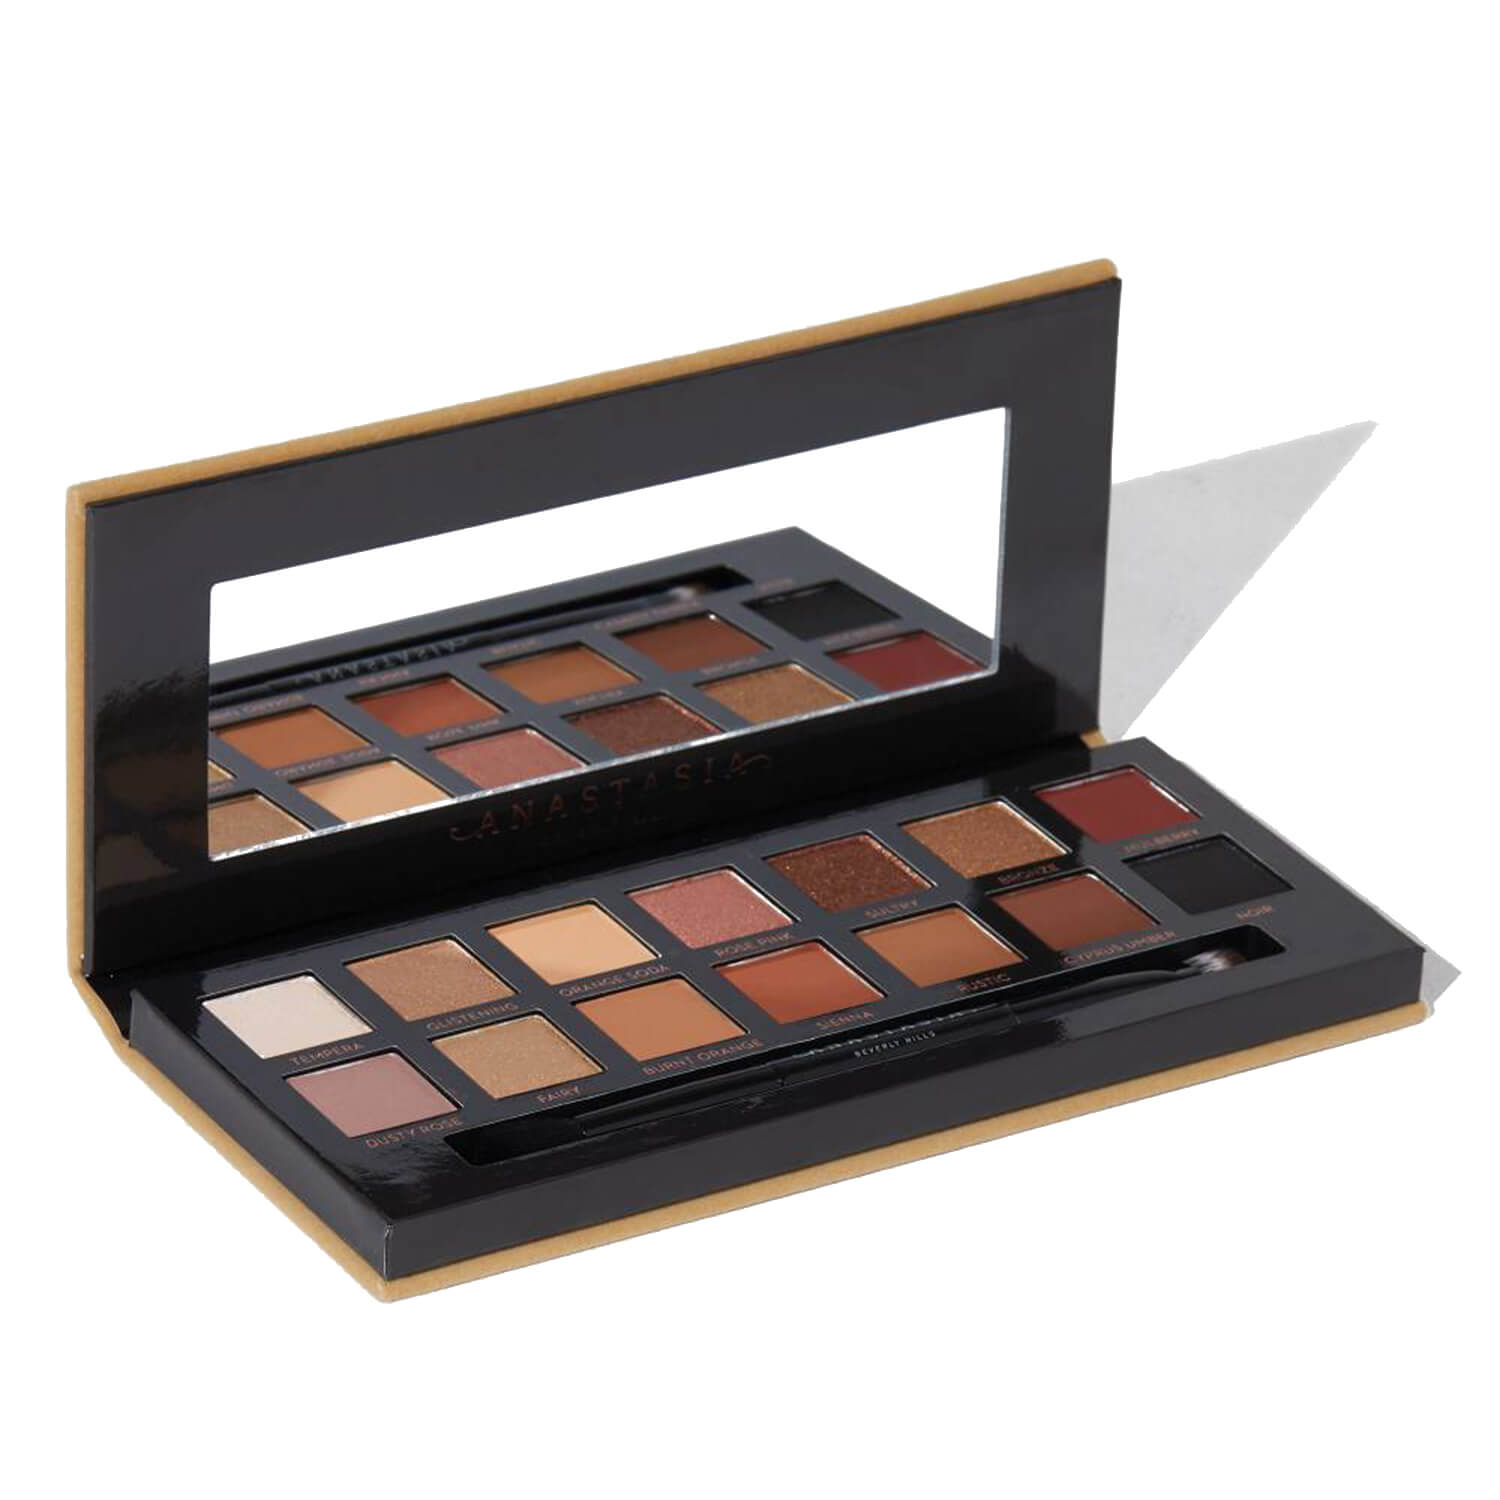 Shop Anastasia Soft Glam Eyeshadow palette available at Heygirl.pk for delivery in Pakistan